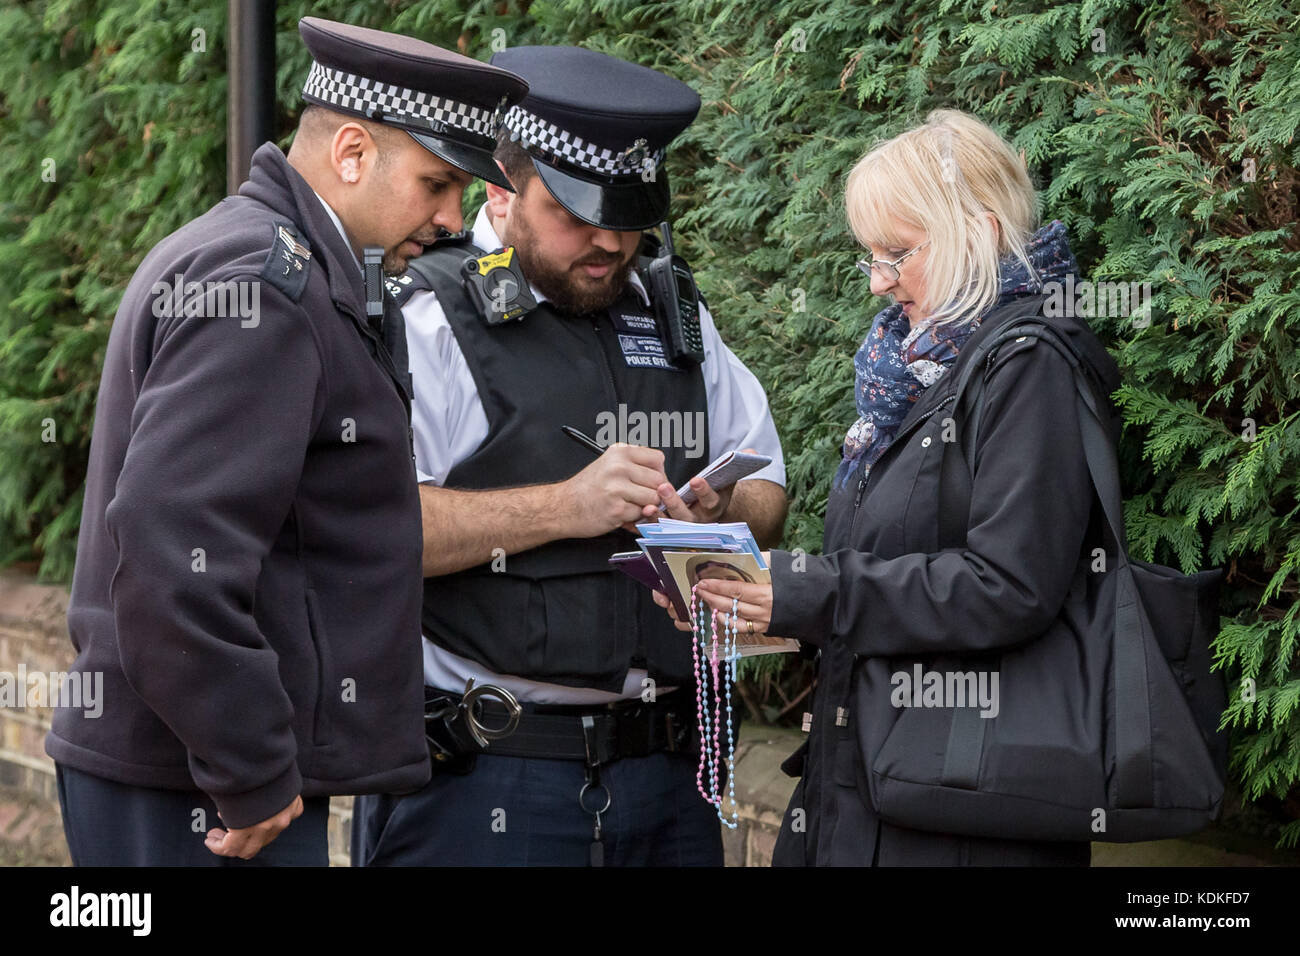 Ealing, west London, UK. 14th Oct, 2017. Christian anti-abortion protesters continue their vigils near Marie Stopes clinic in Ealing. Credit: Guy Corbishley/Alamy Live News Stock Photo